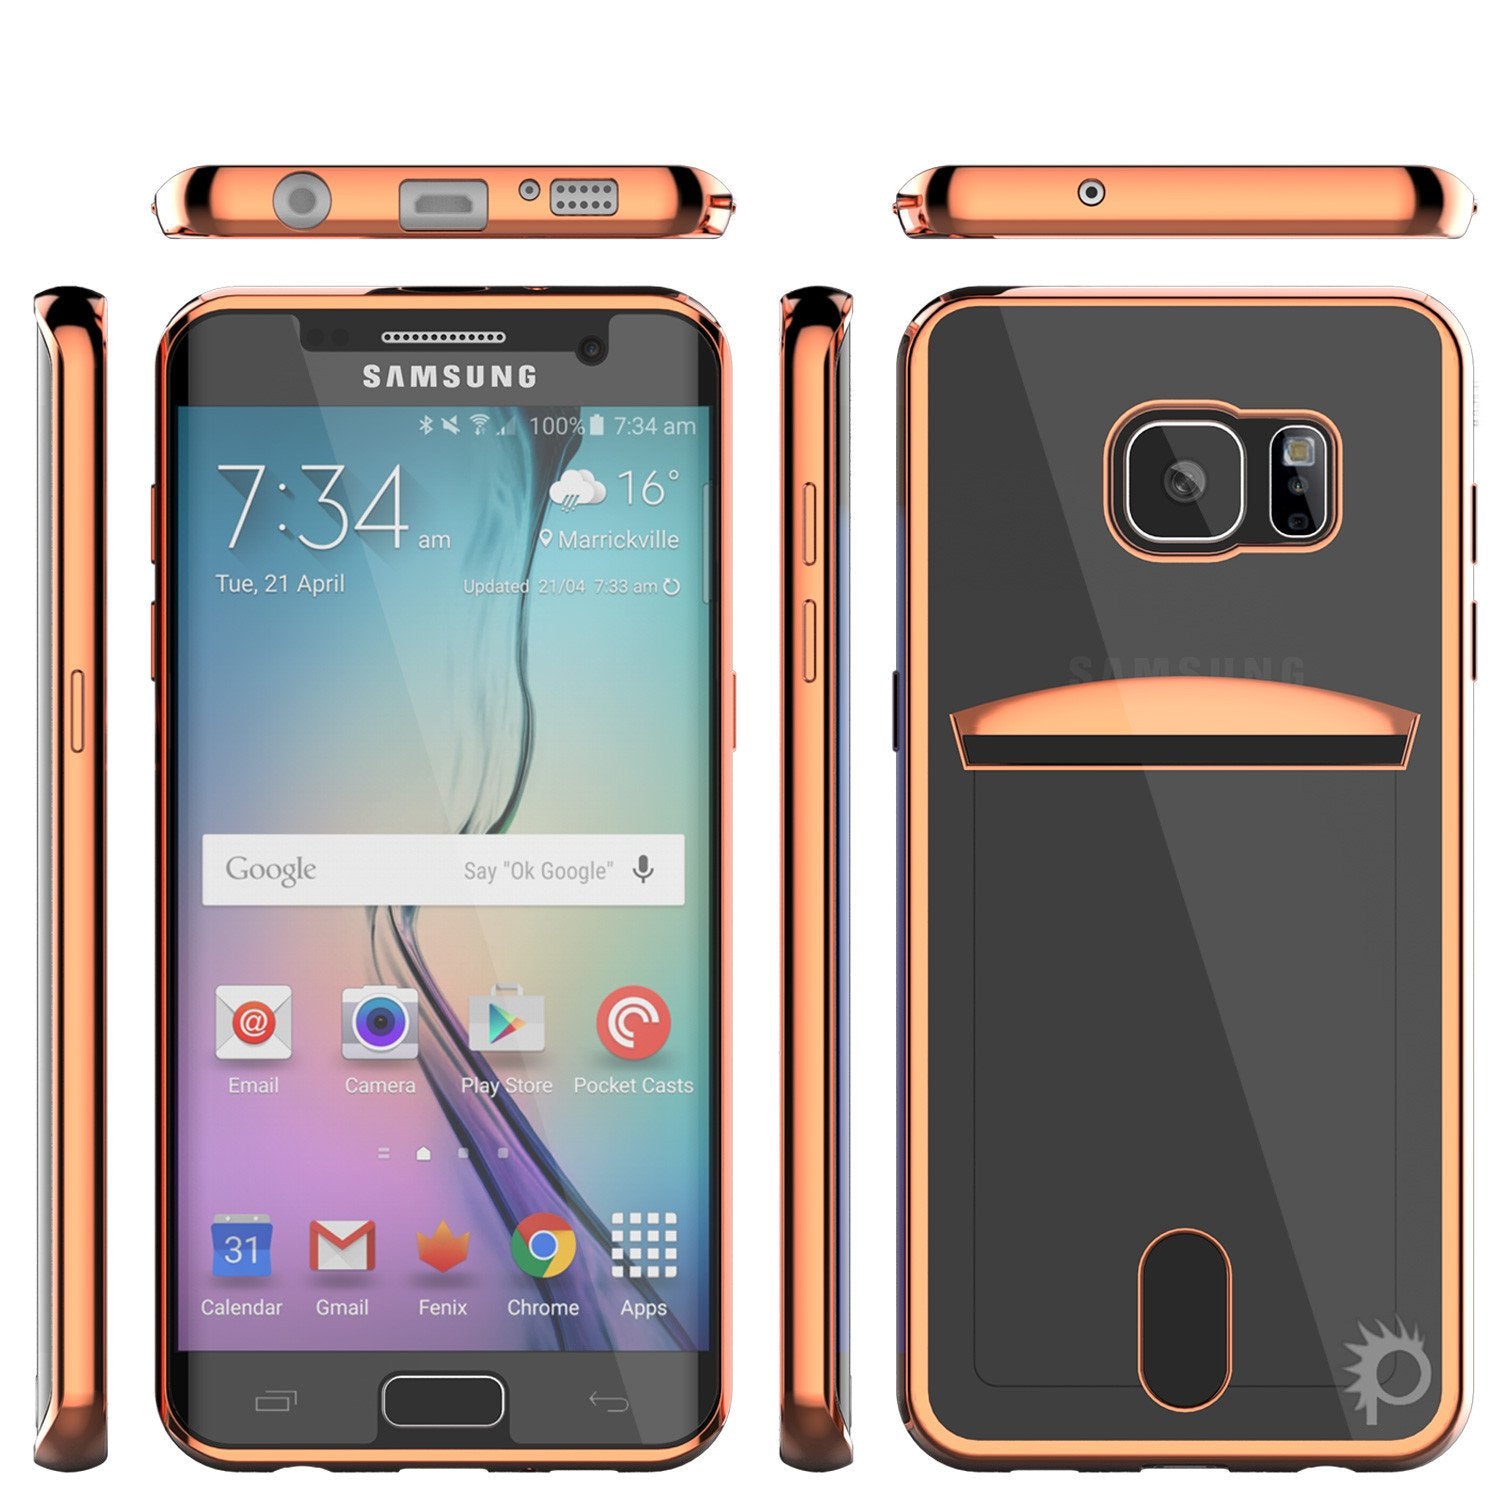 Galaxy S6 EDGE+ Plus Case, PUNKCASE® LUCID Rose Gold Series | Card Slot | SHIELD Screen Protector - PunkCase NZ